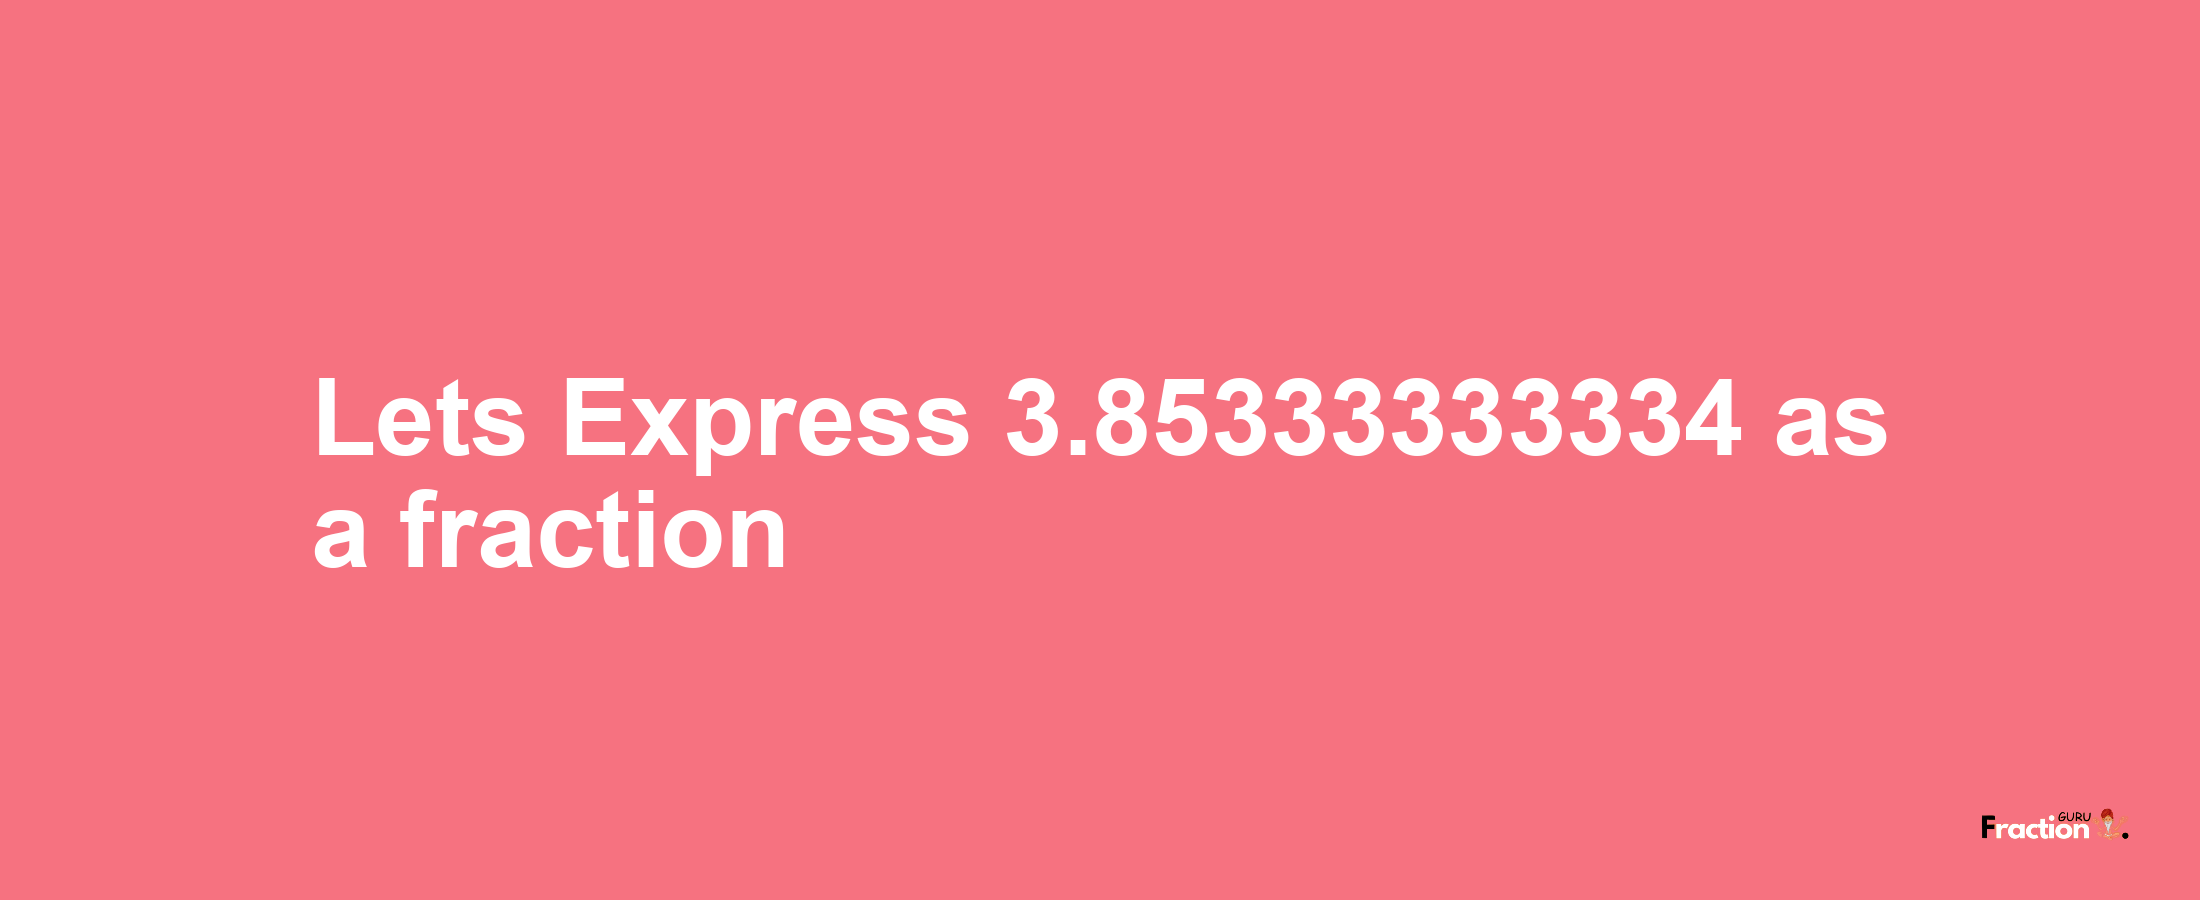 Lets Express 3.85333333334 as afraction